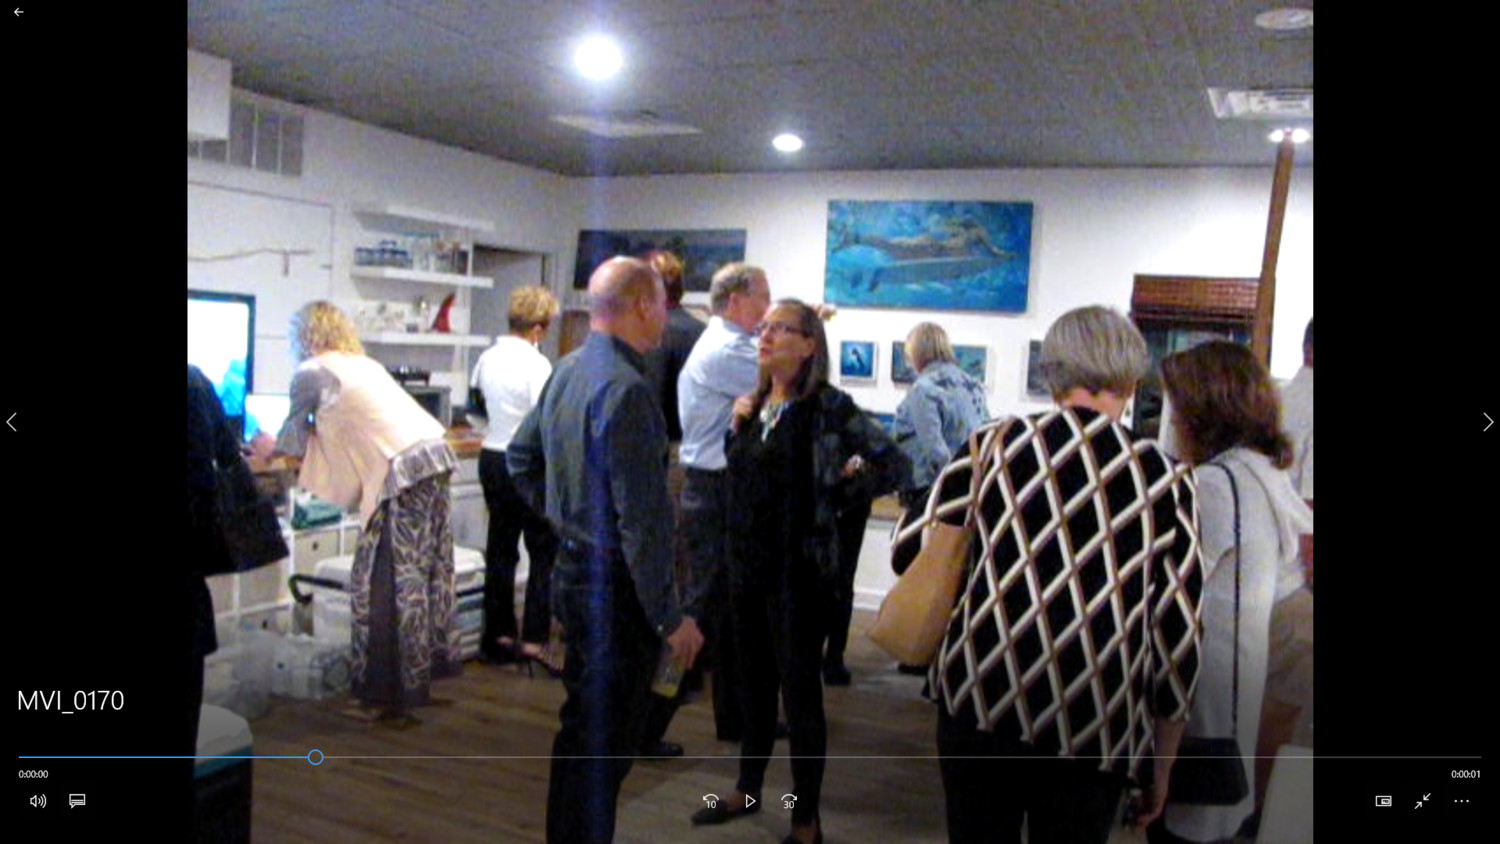 Save Guana Now co-founder Nicole Crosby (center) talks with guests during a fundraiser at the Coquina Studio Gallery in Jacksonville Beach.